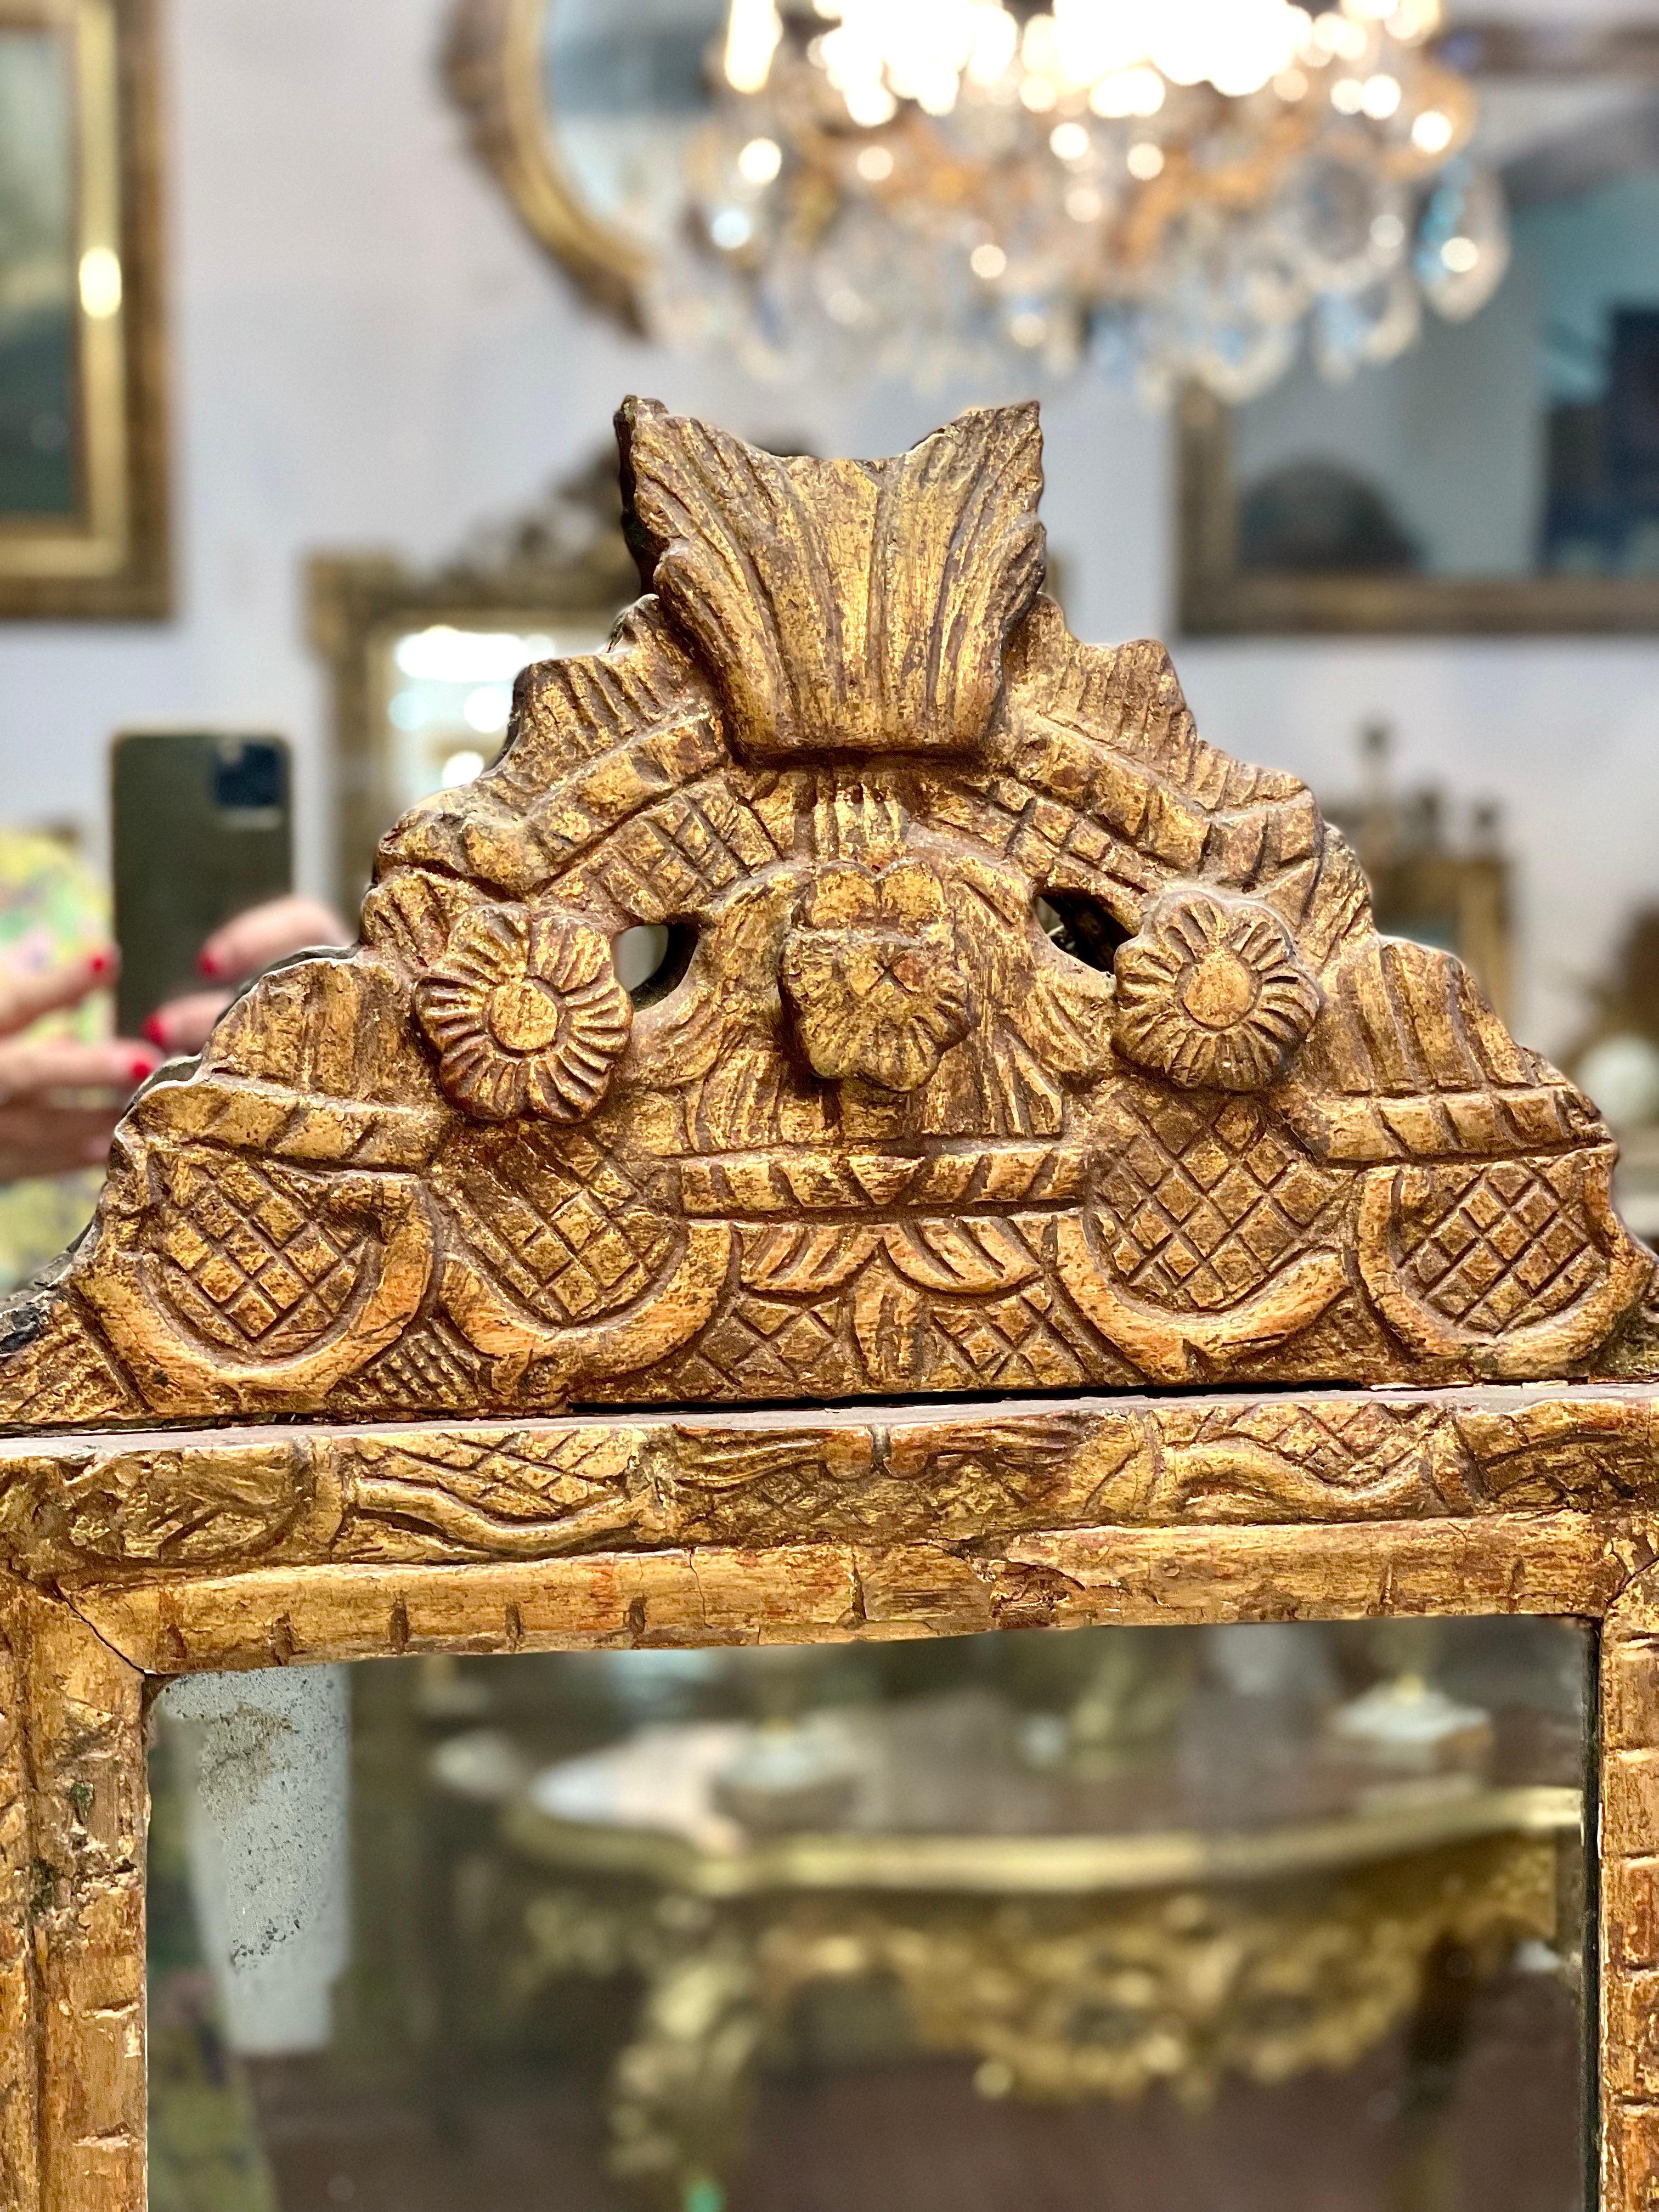 A charming little 18th century, French Régence period boudoirstyle  mirror, in gilded and carved wood, with an ornate pediment featuring a trio of flowers protruding from a latticework background. The carved decoration is continued around the frame